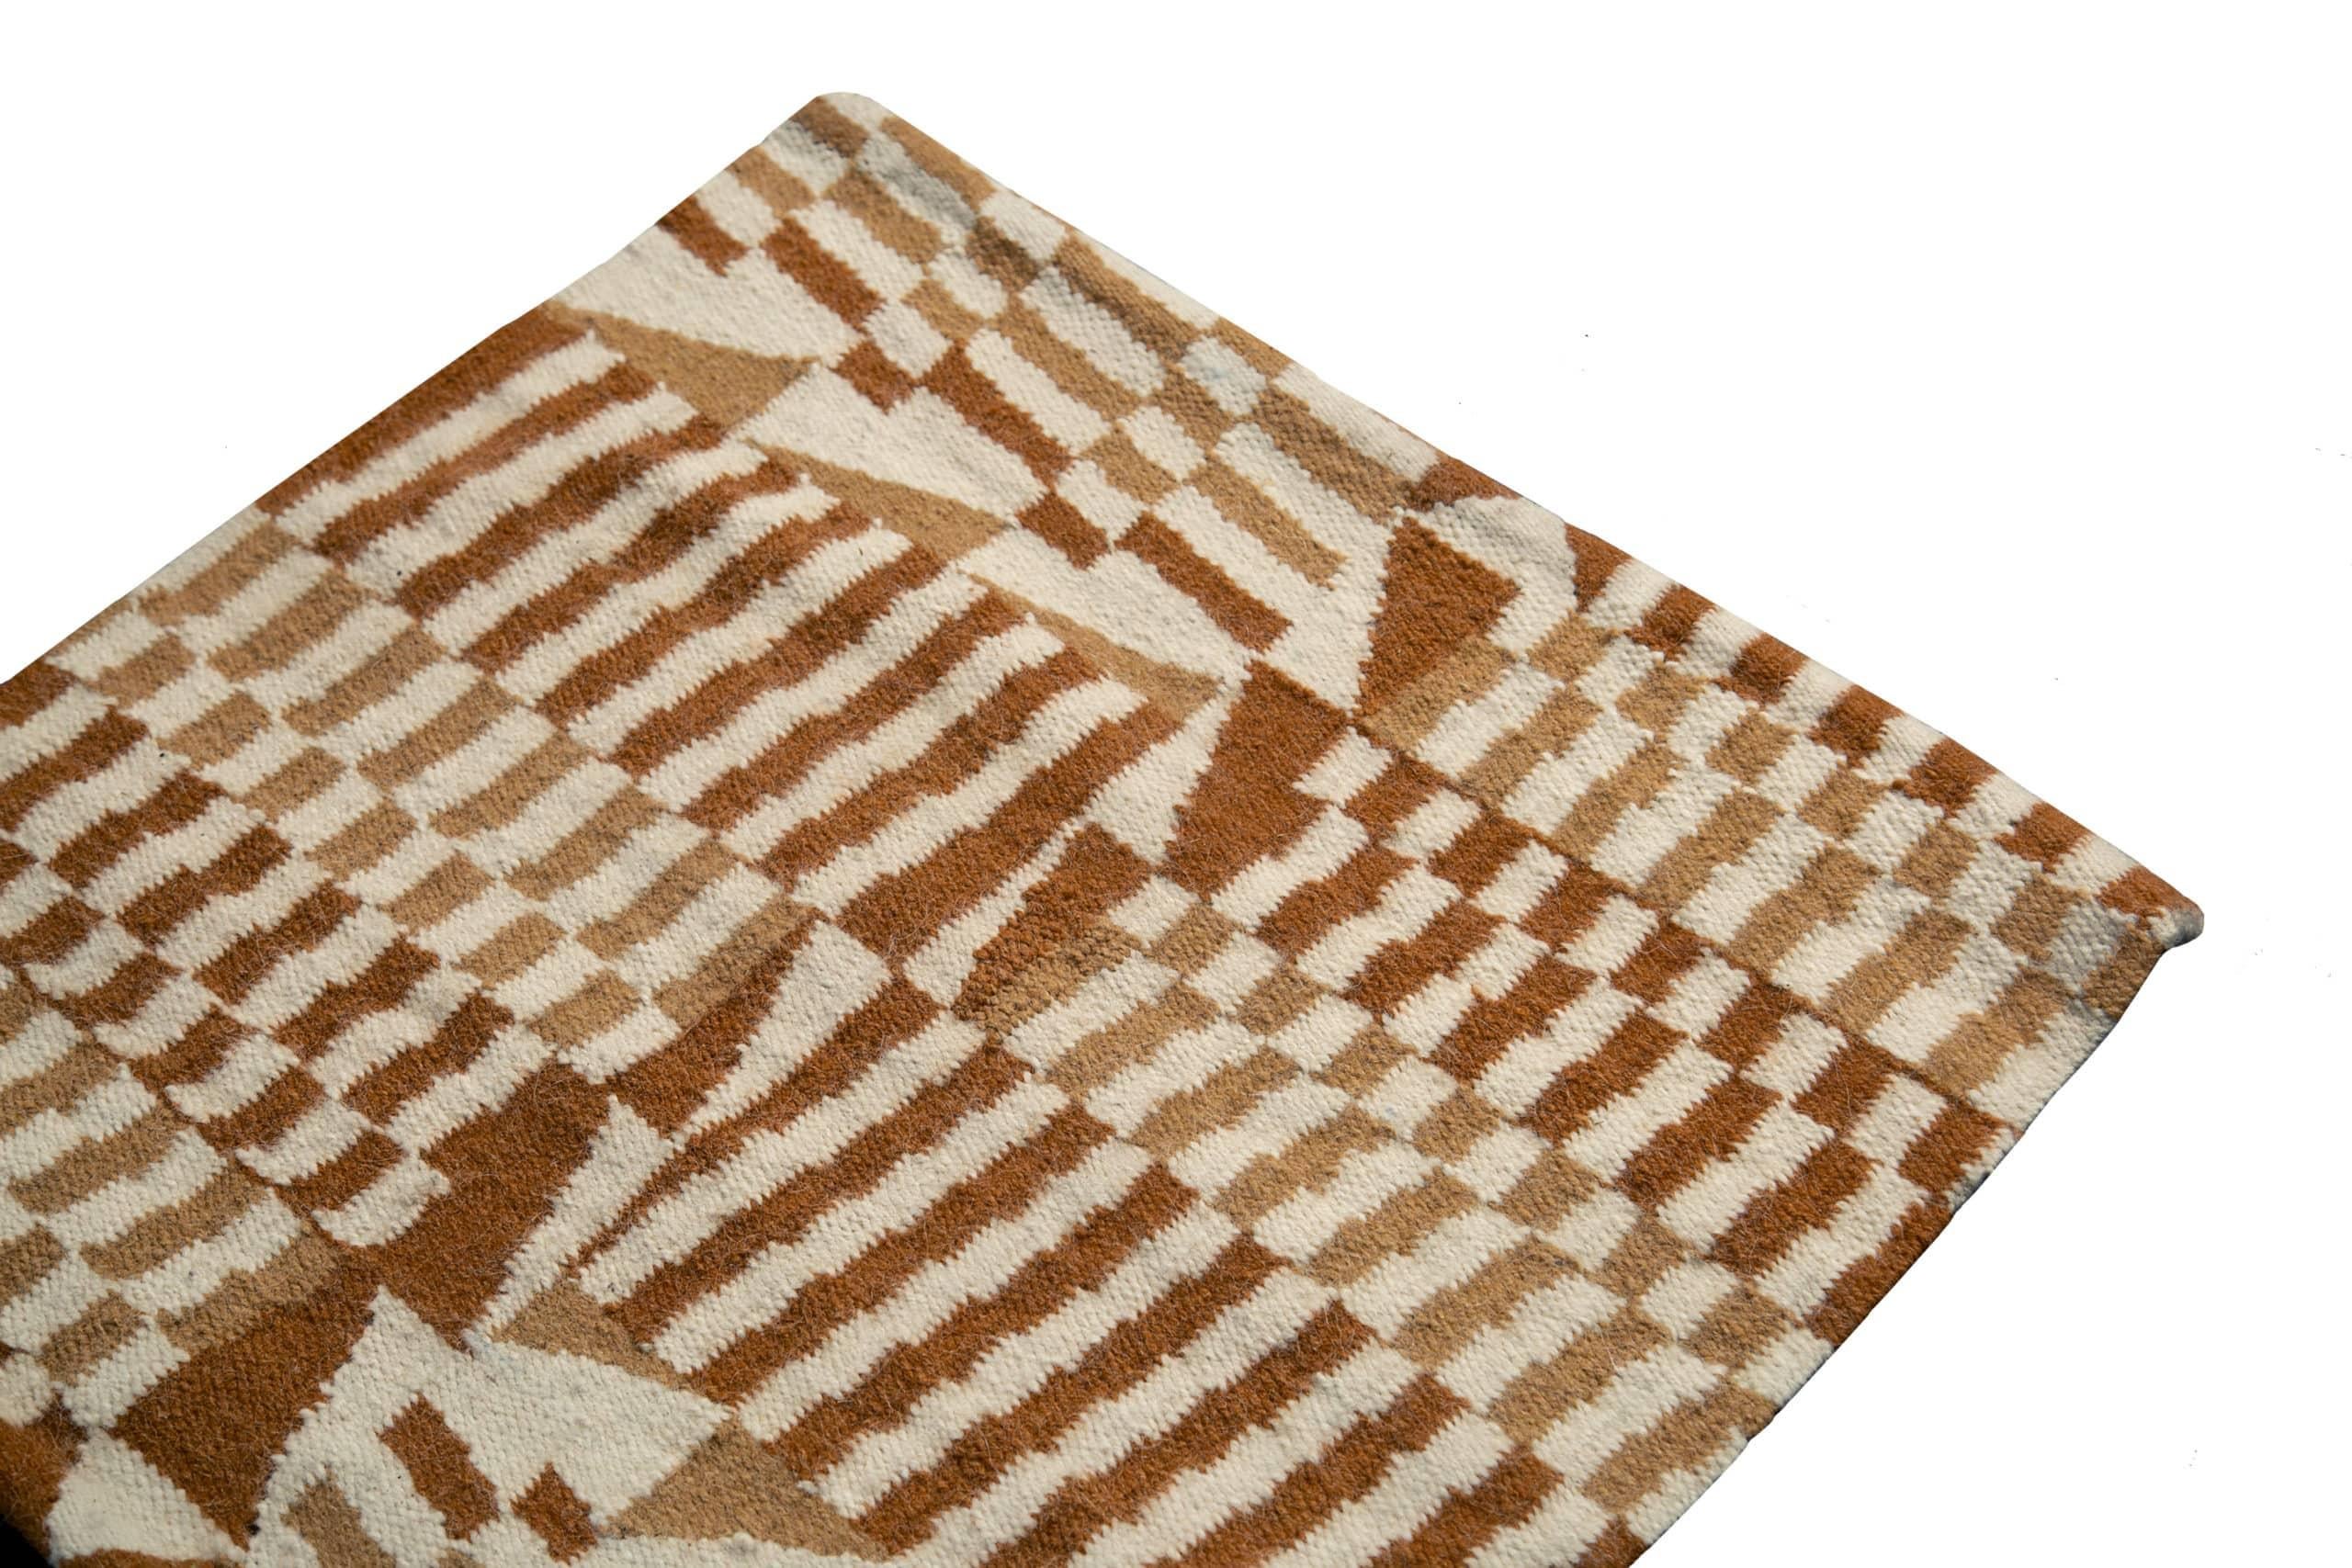 Peruvian Nazmiyal Collection Andean Checkers Design Kilim Rug By Genaro Rivas. 8 ft x 8ft For Sale